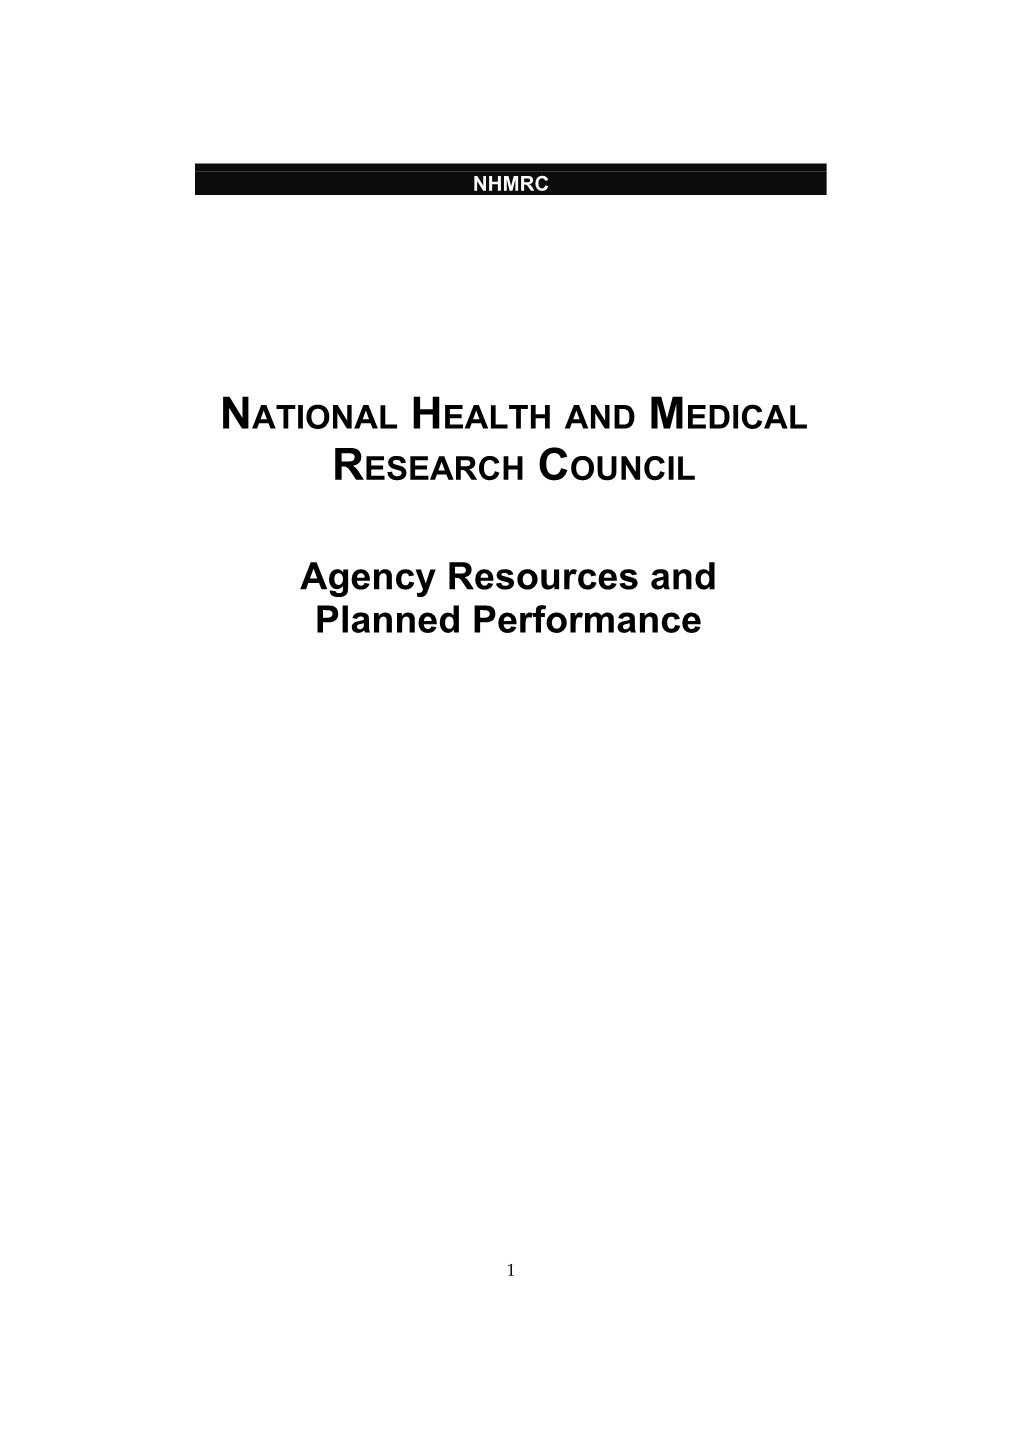 NATIONAL HEALTH and MEDICAL RESEARCH COUNCIL Agency Resources and Planned Performance